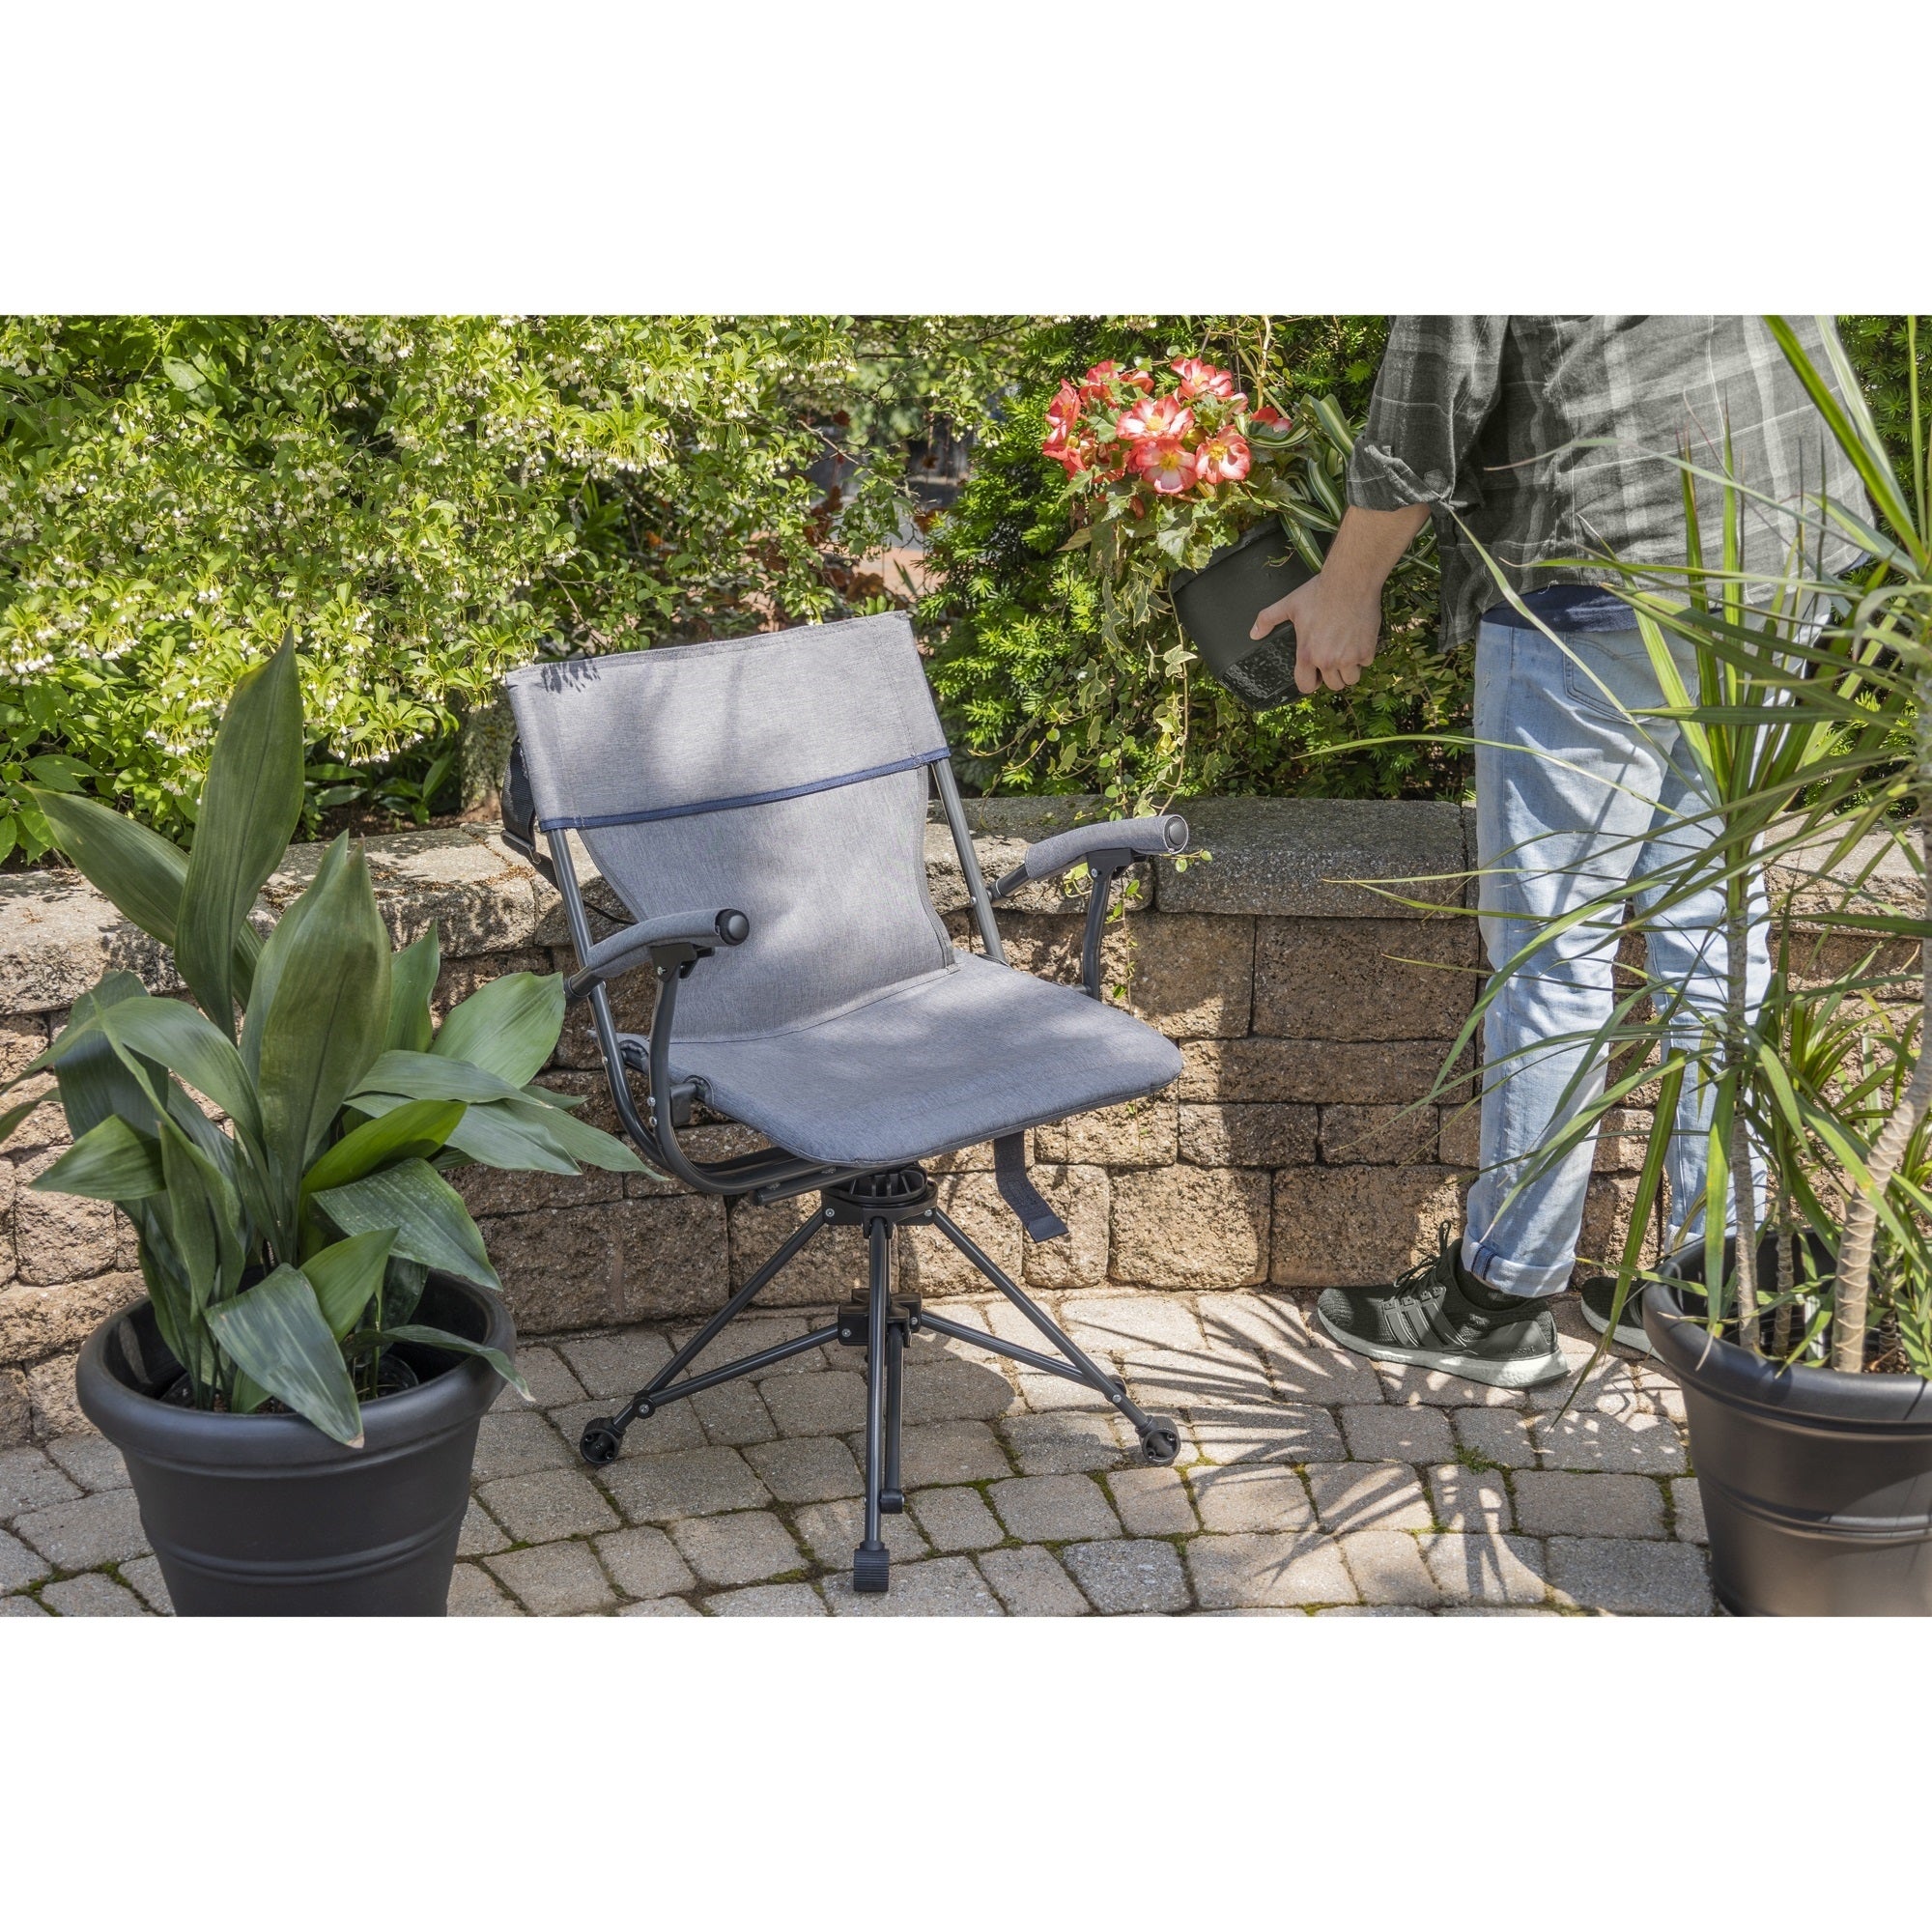 Zenithen Outdoor/Indoor Folding Portable Lawn 360 Swivel Bag Chair with Armrests, Grey